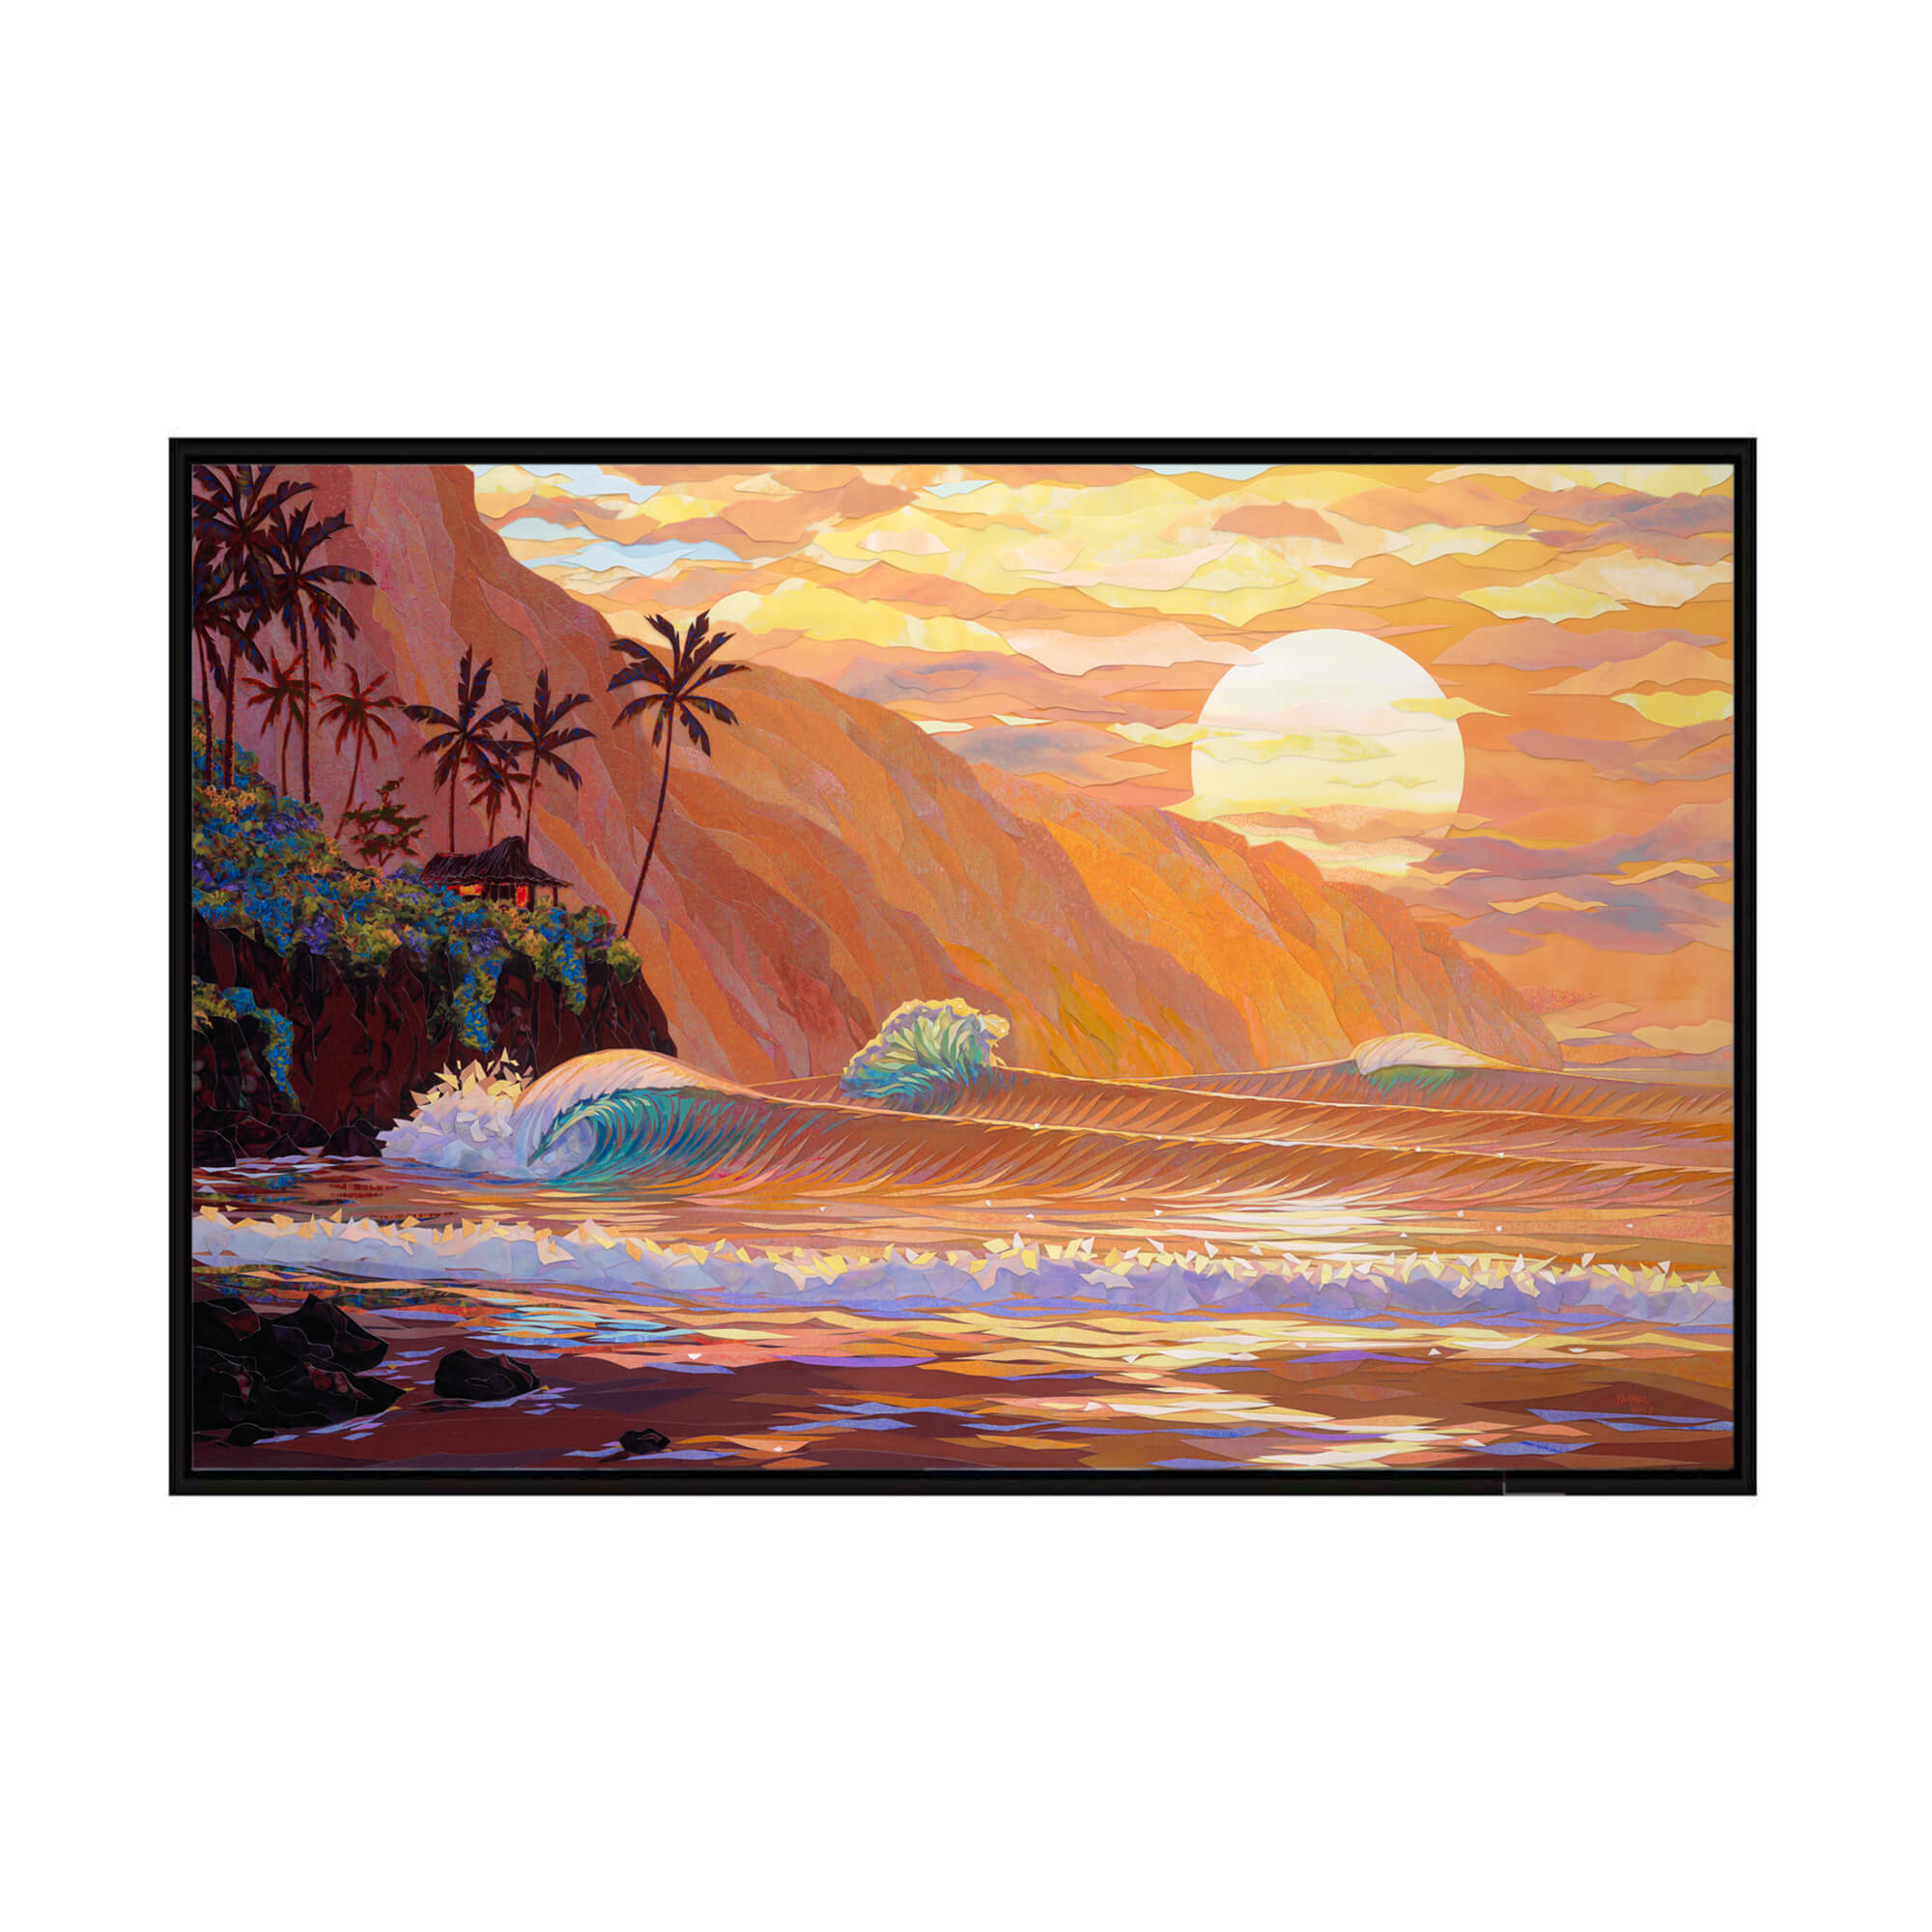 A framed canvas giclée art print featuring a collage of a sunset view of the ocean as seen from a tropical beach in Hawaii by Hawaii artist Patrick Parker